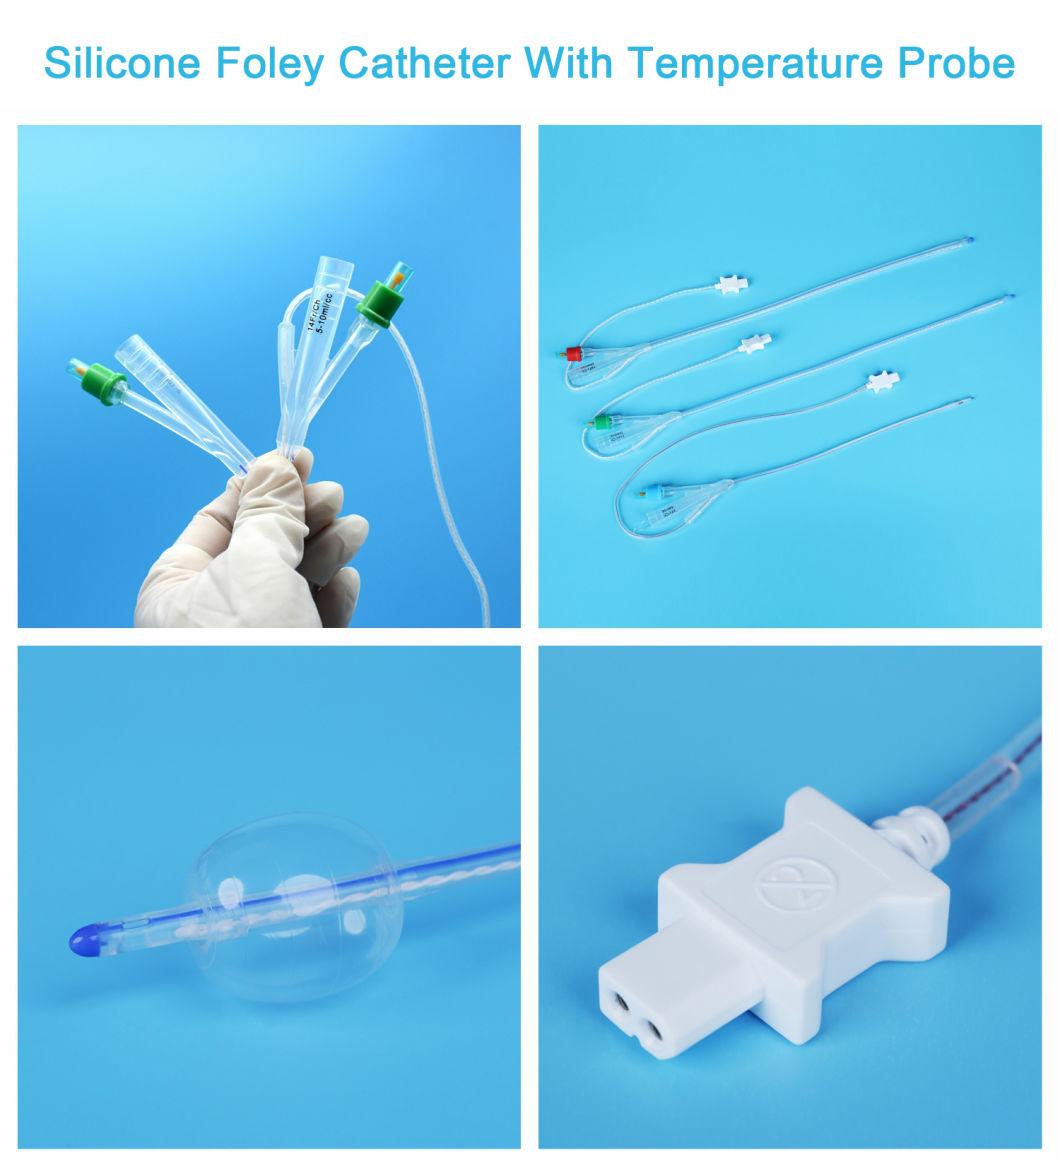 with Temperature Sensor Probe Silicone Urinary Foley Catheter Round Tipped for Temperature Monitoring Urethral Use